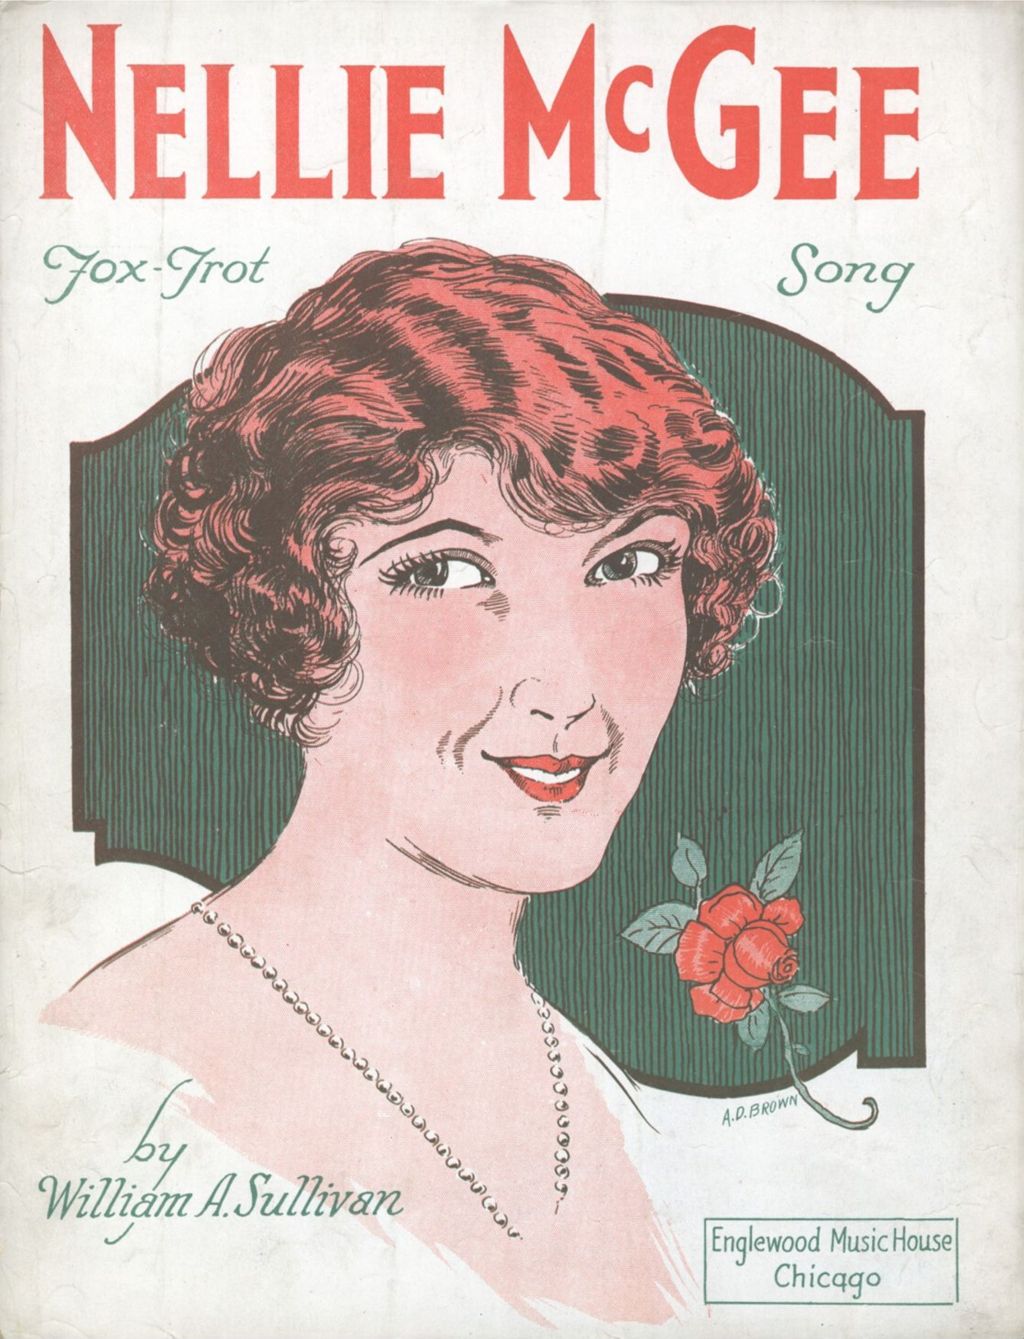 Miniature of Nellie McGee